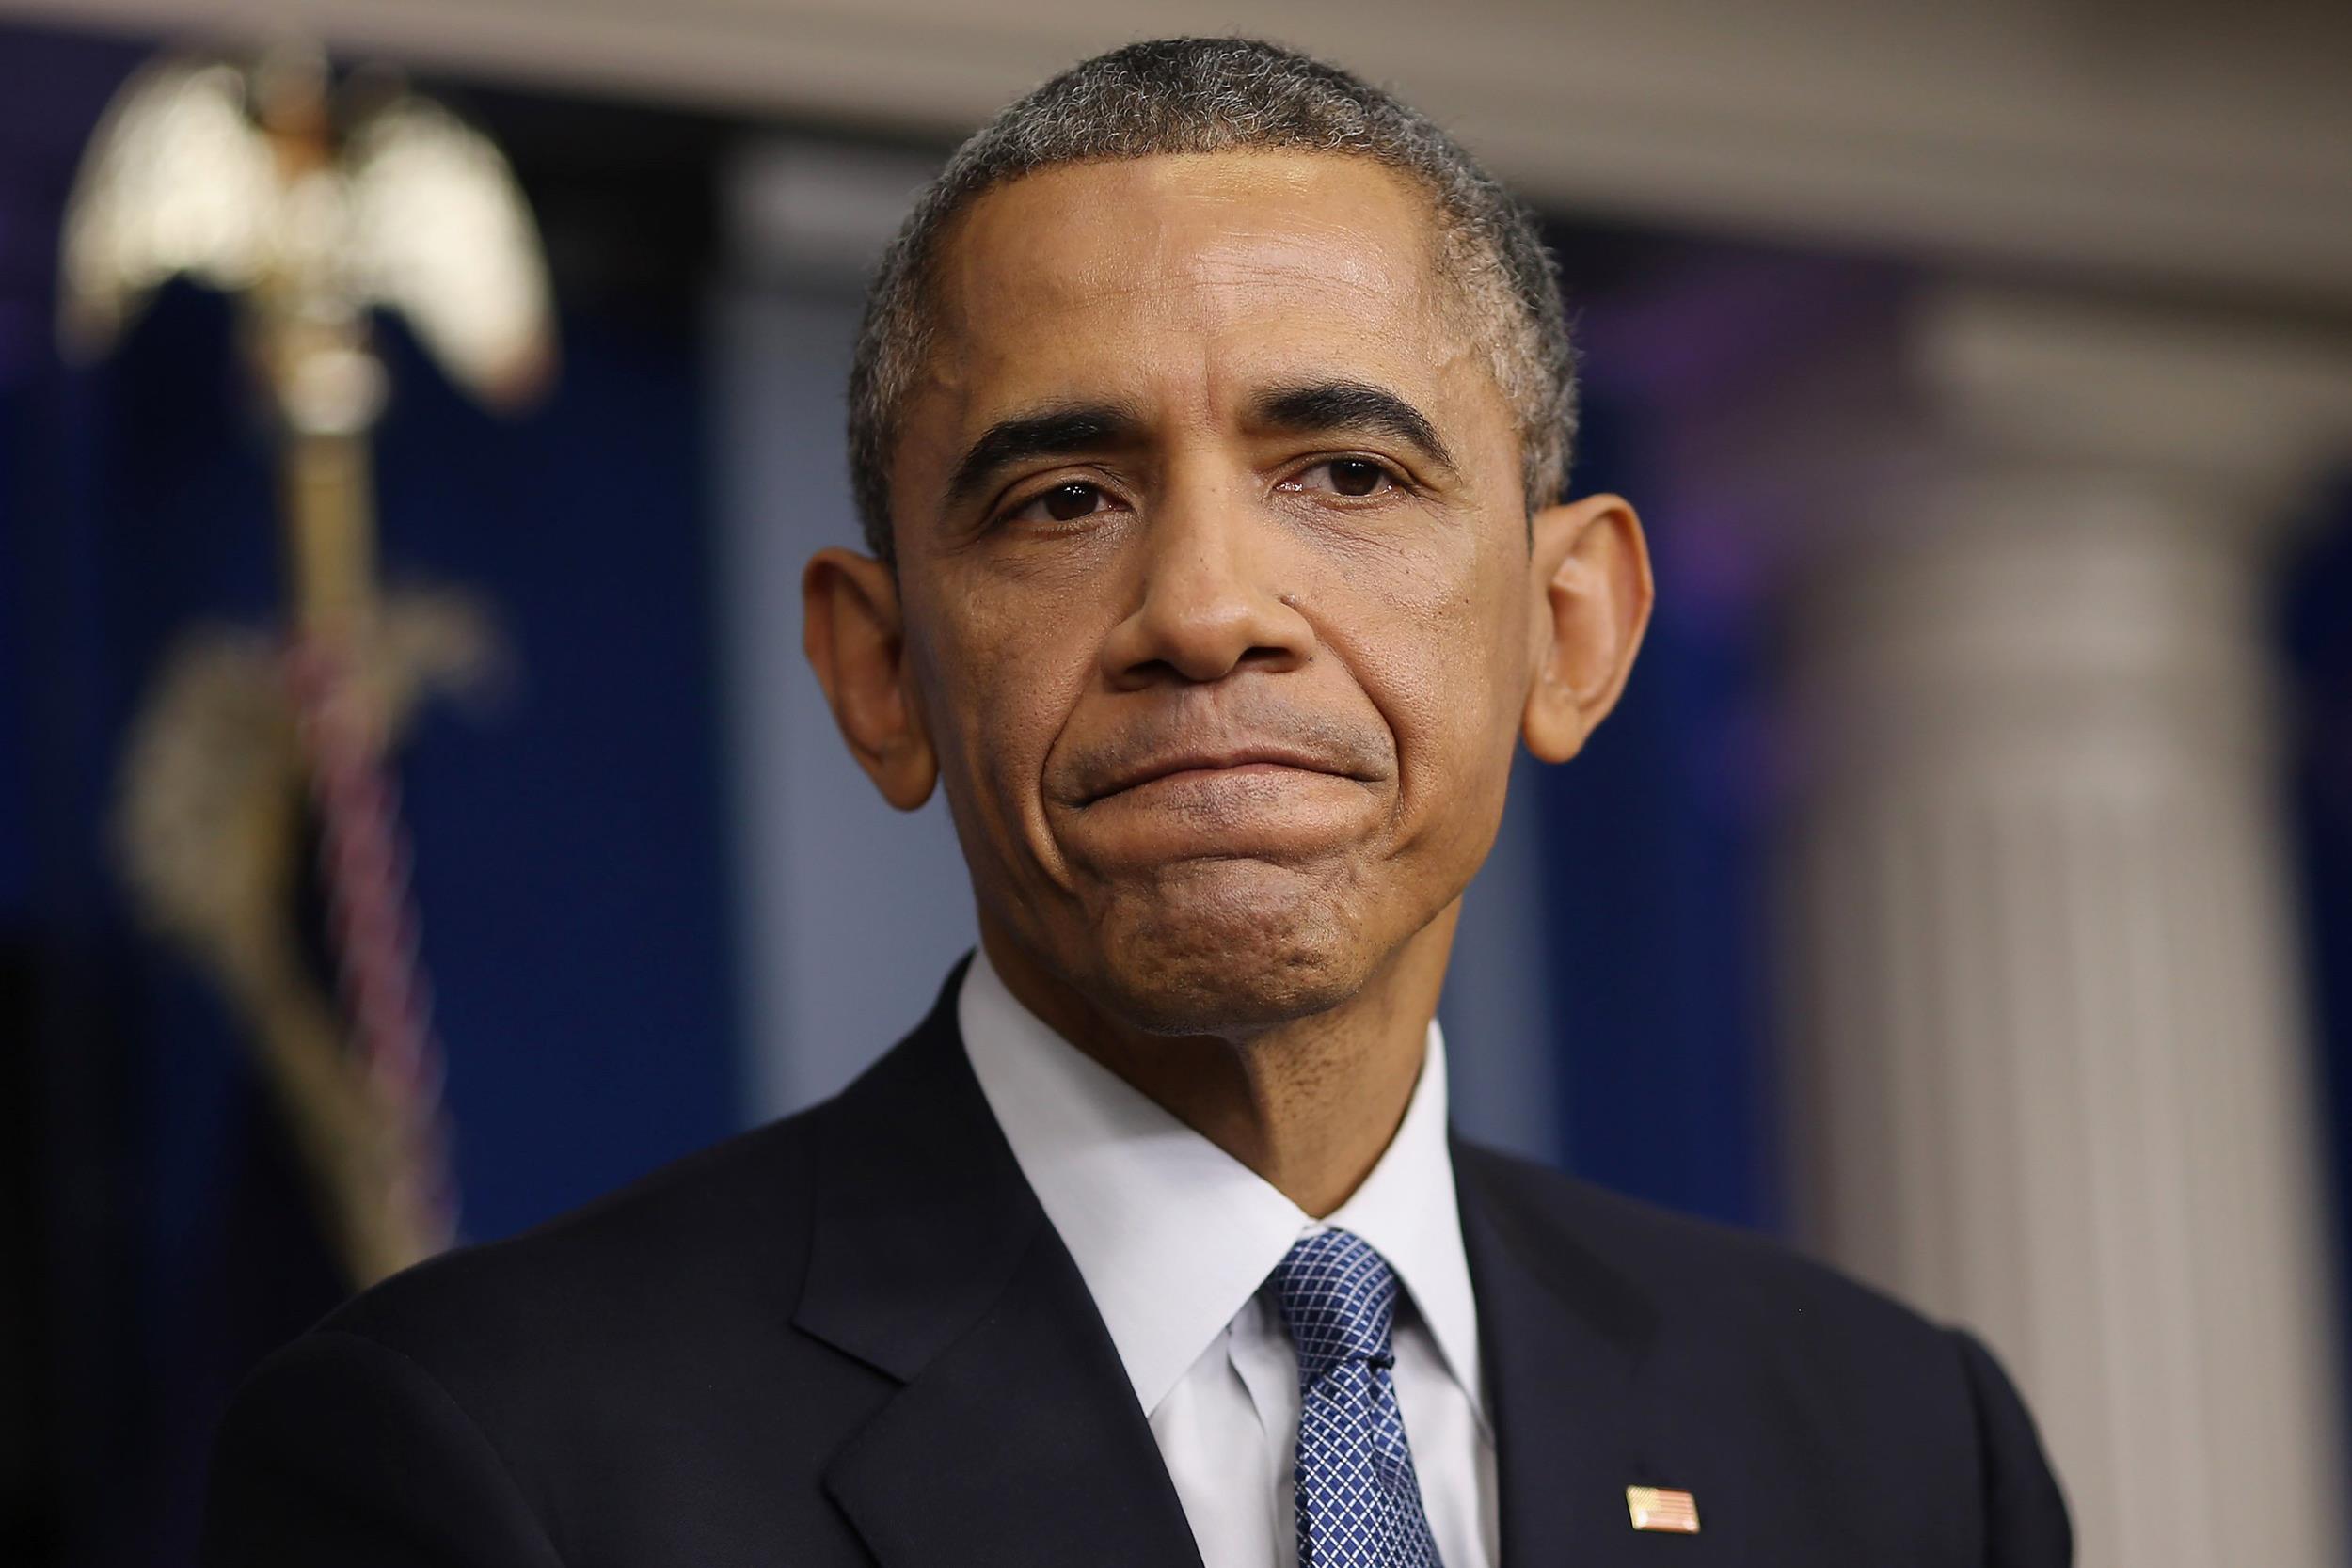 President Obama shares his thoughts on Sony's decision to cancel The Interview.